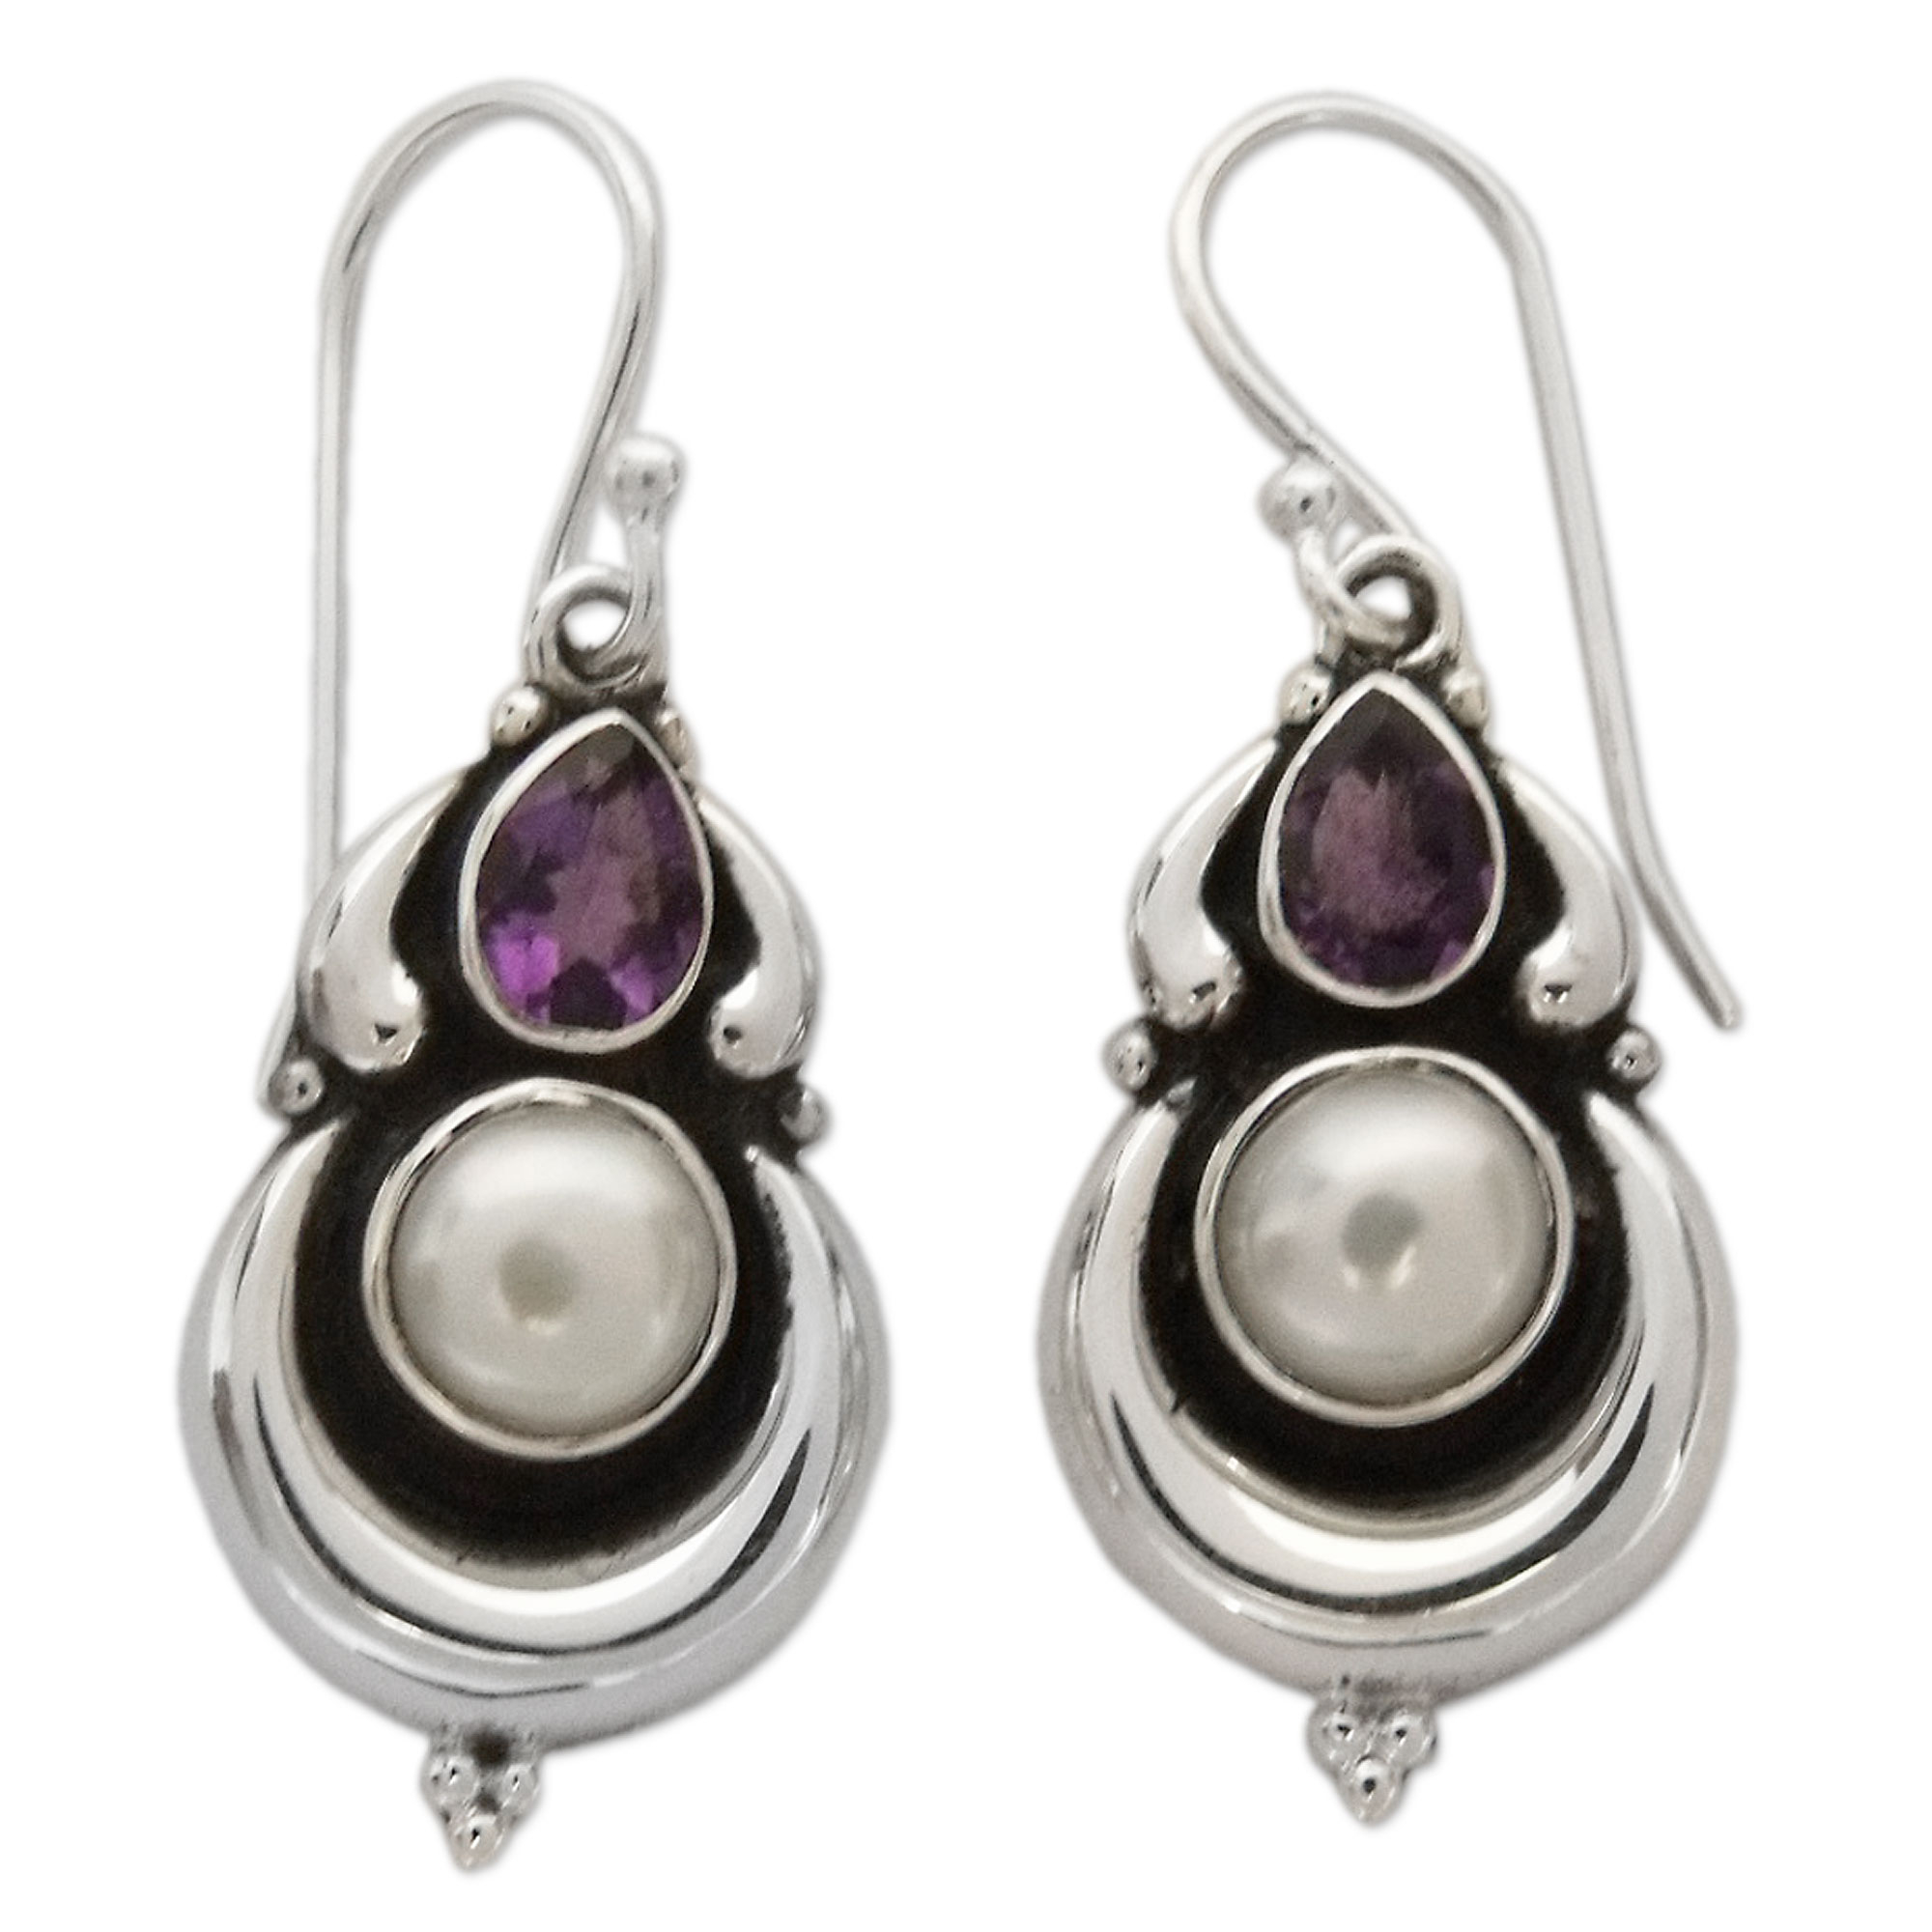 Pearls and Amethyst on Sterling Silver Earrings from India - Jaipur ...